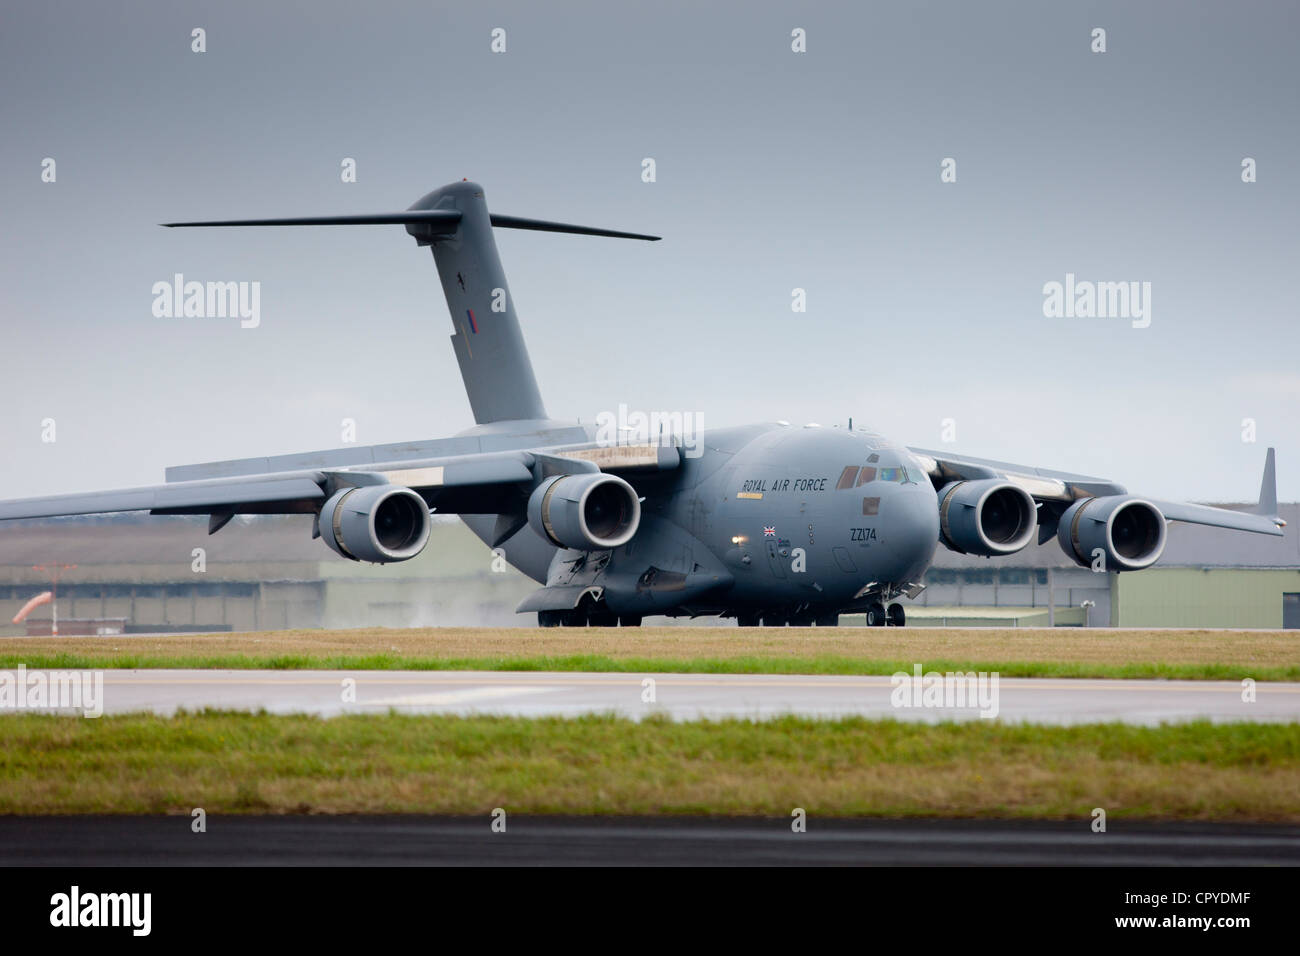 RAF C17 Globemaster air transport troop and cargo plane at RAF Brize Norton Air Base in Oxfordshire, UK Stock Photo